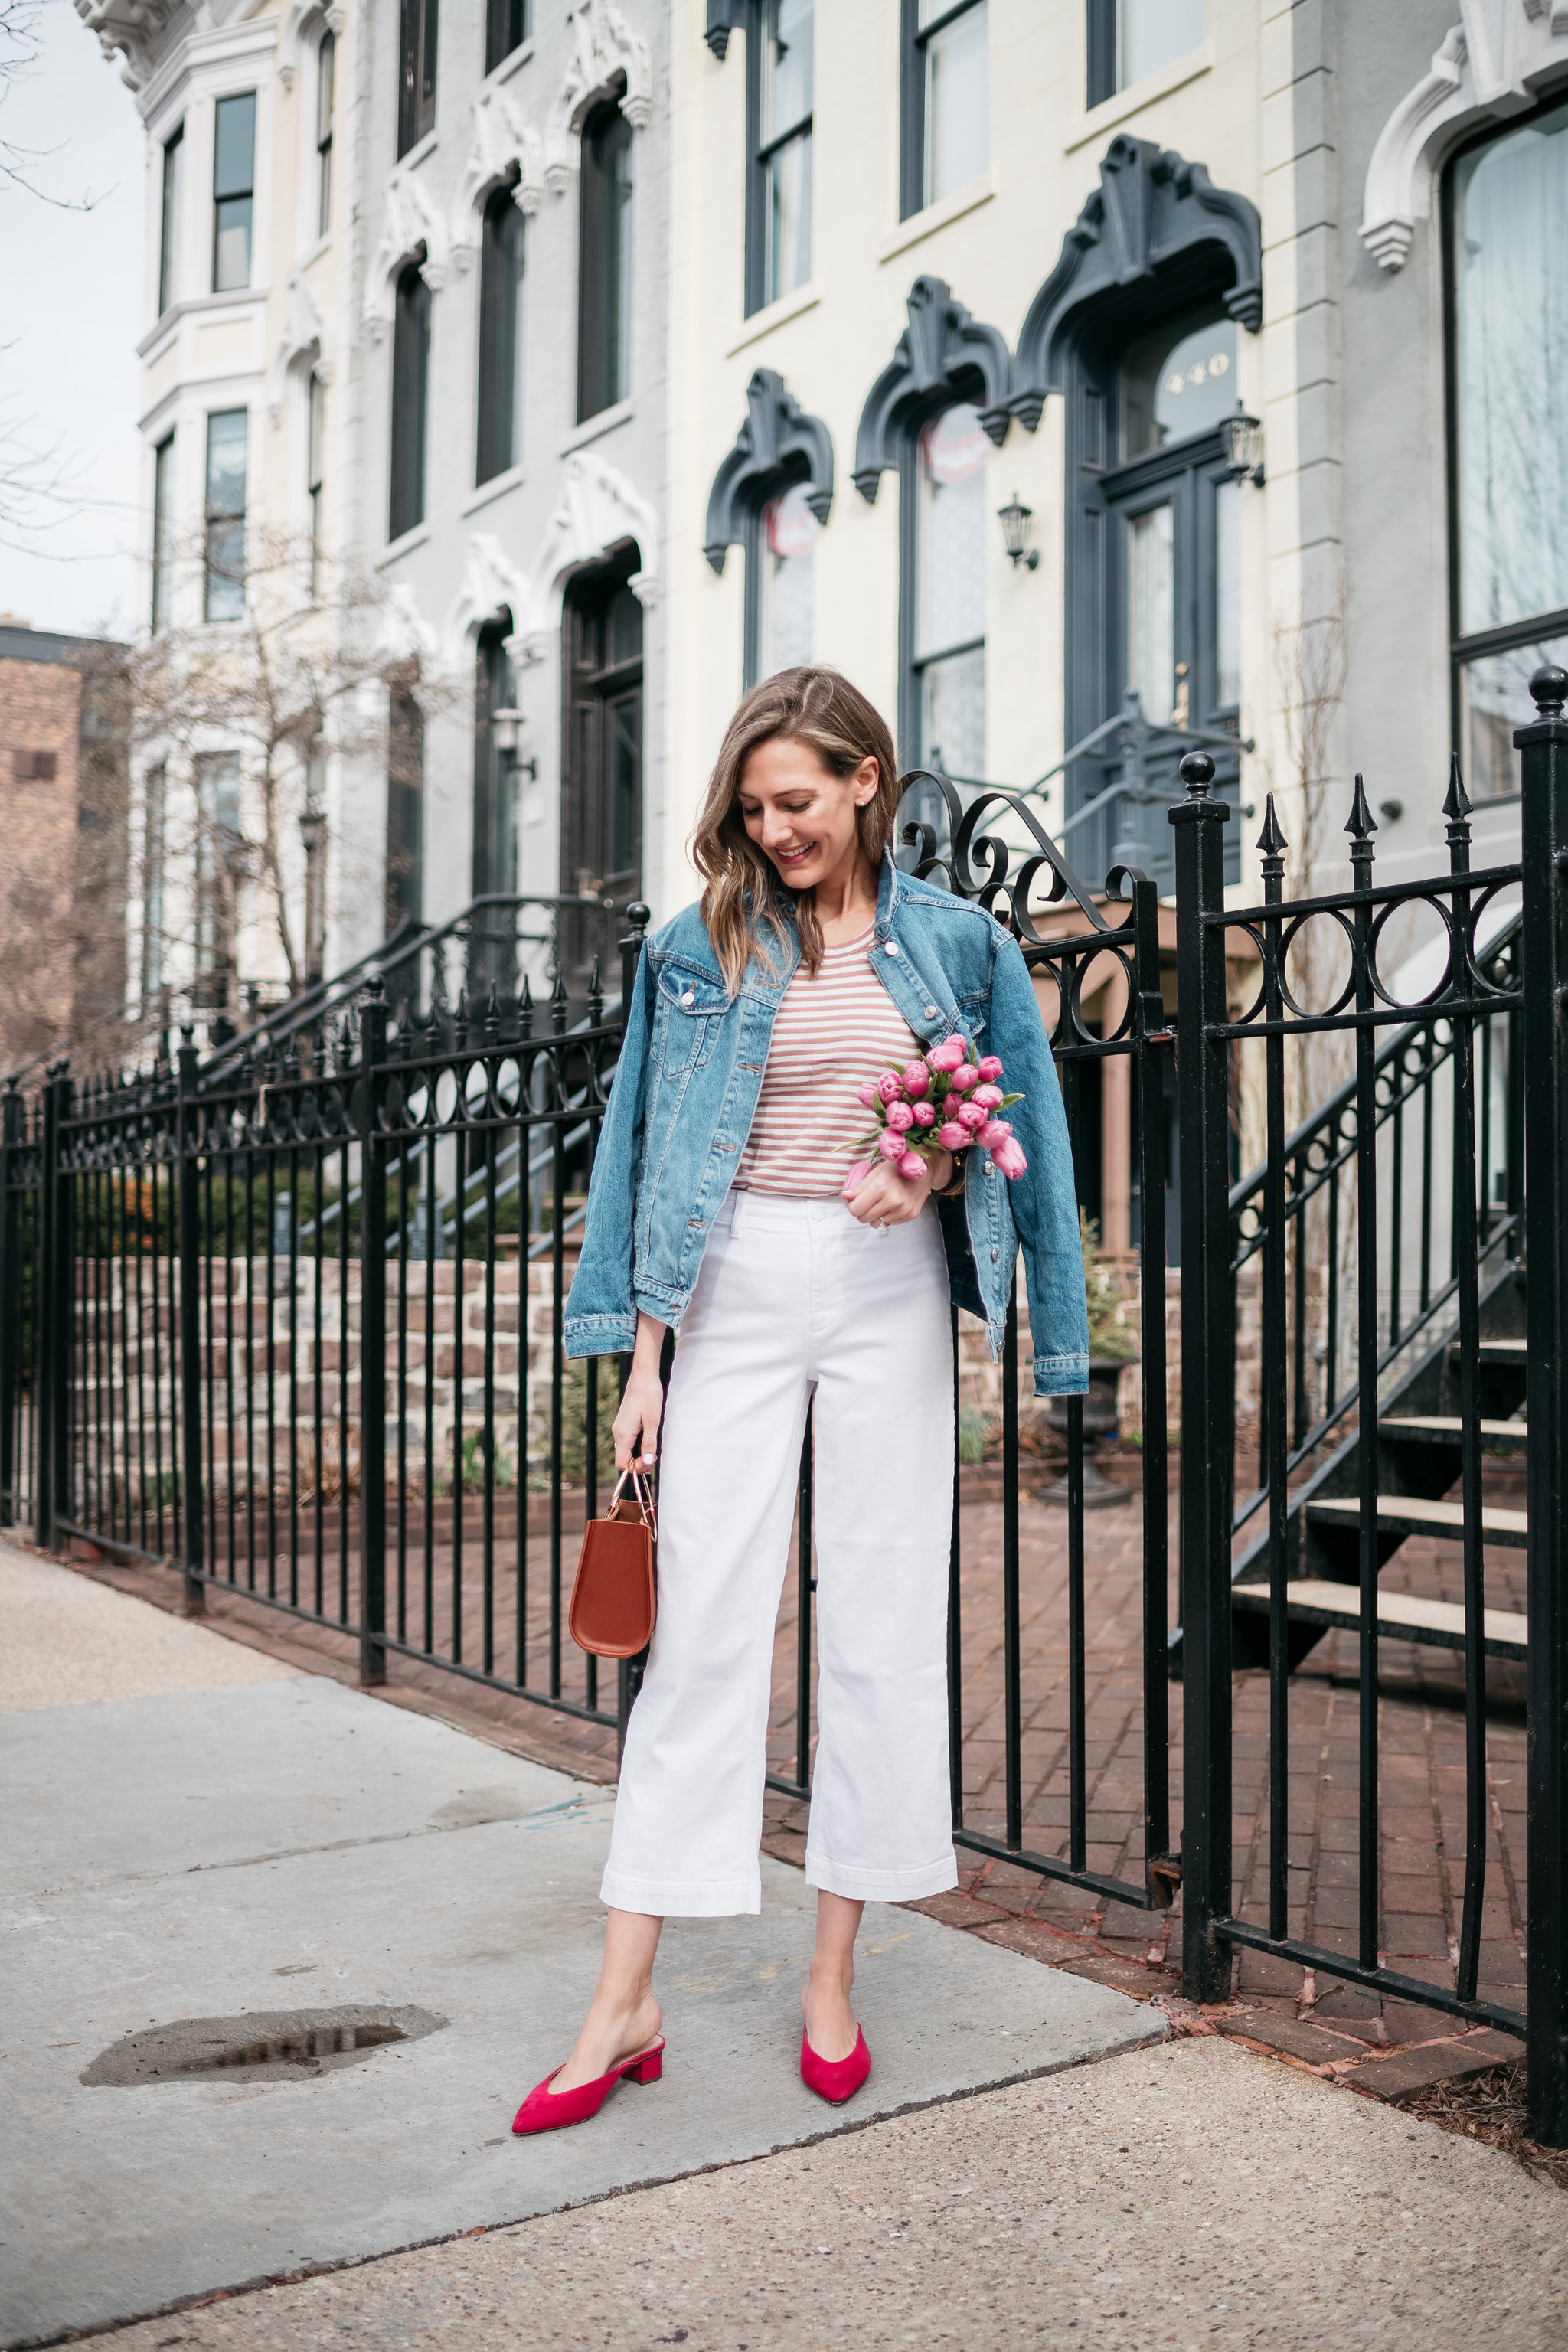 Denim Culottes, The Must Have For AW15